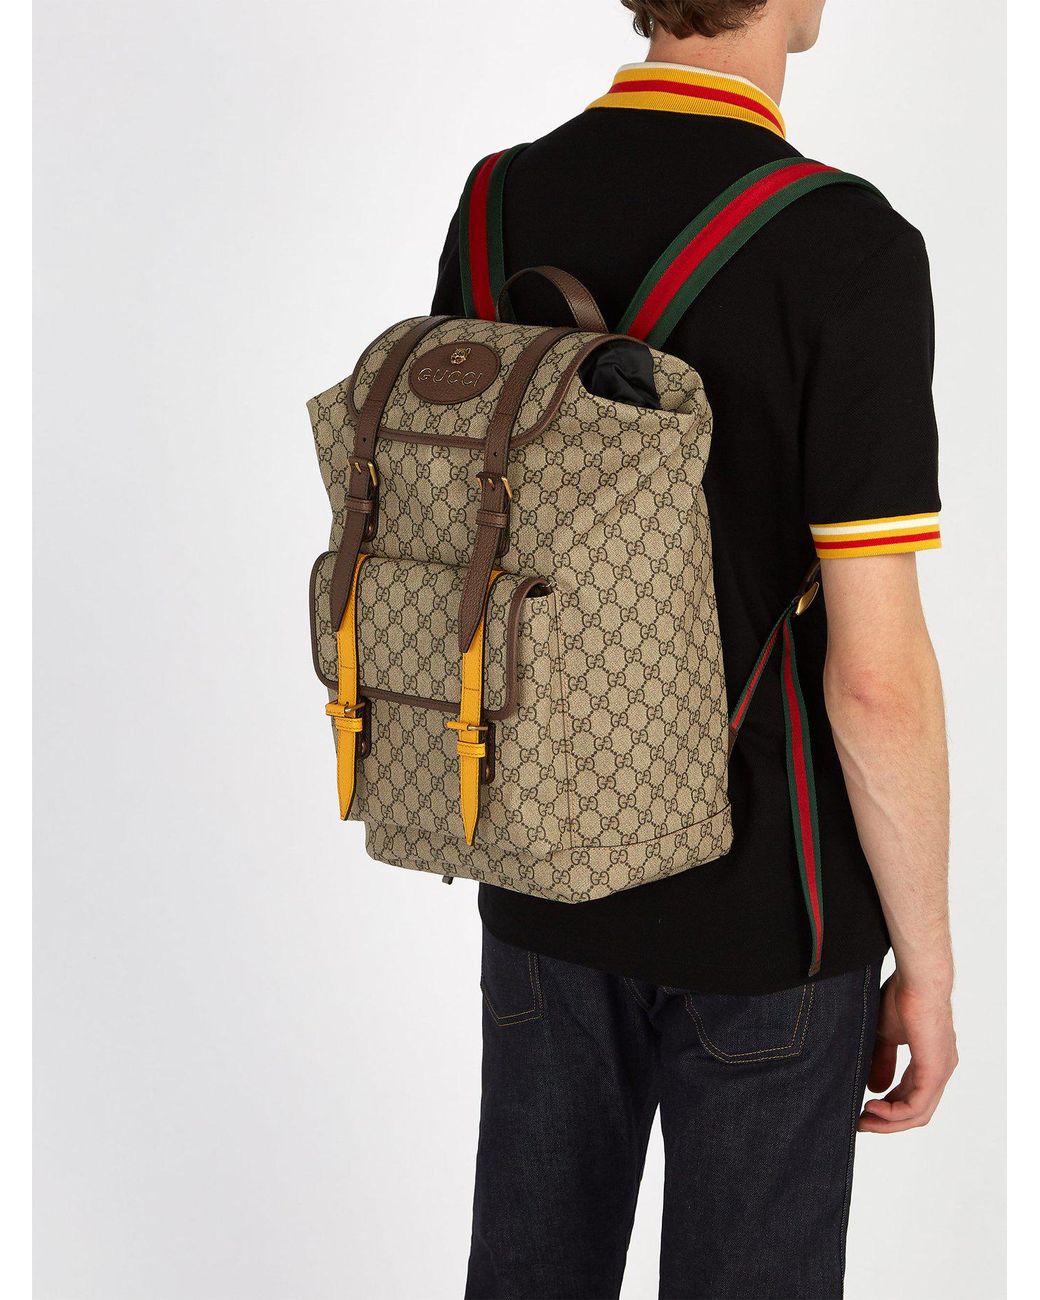 GG supreme leather backpack Gucci